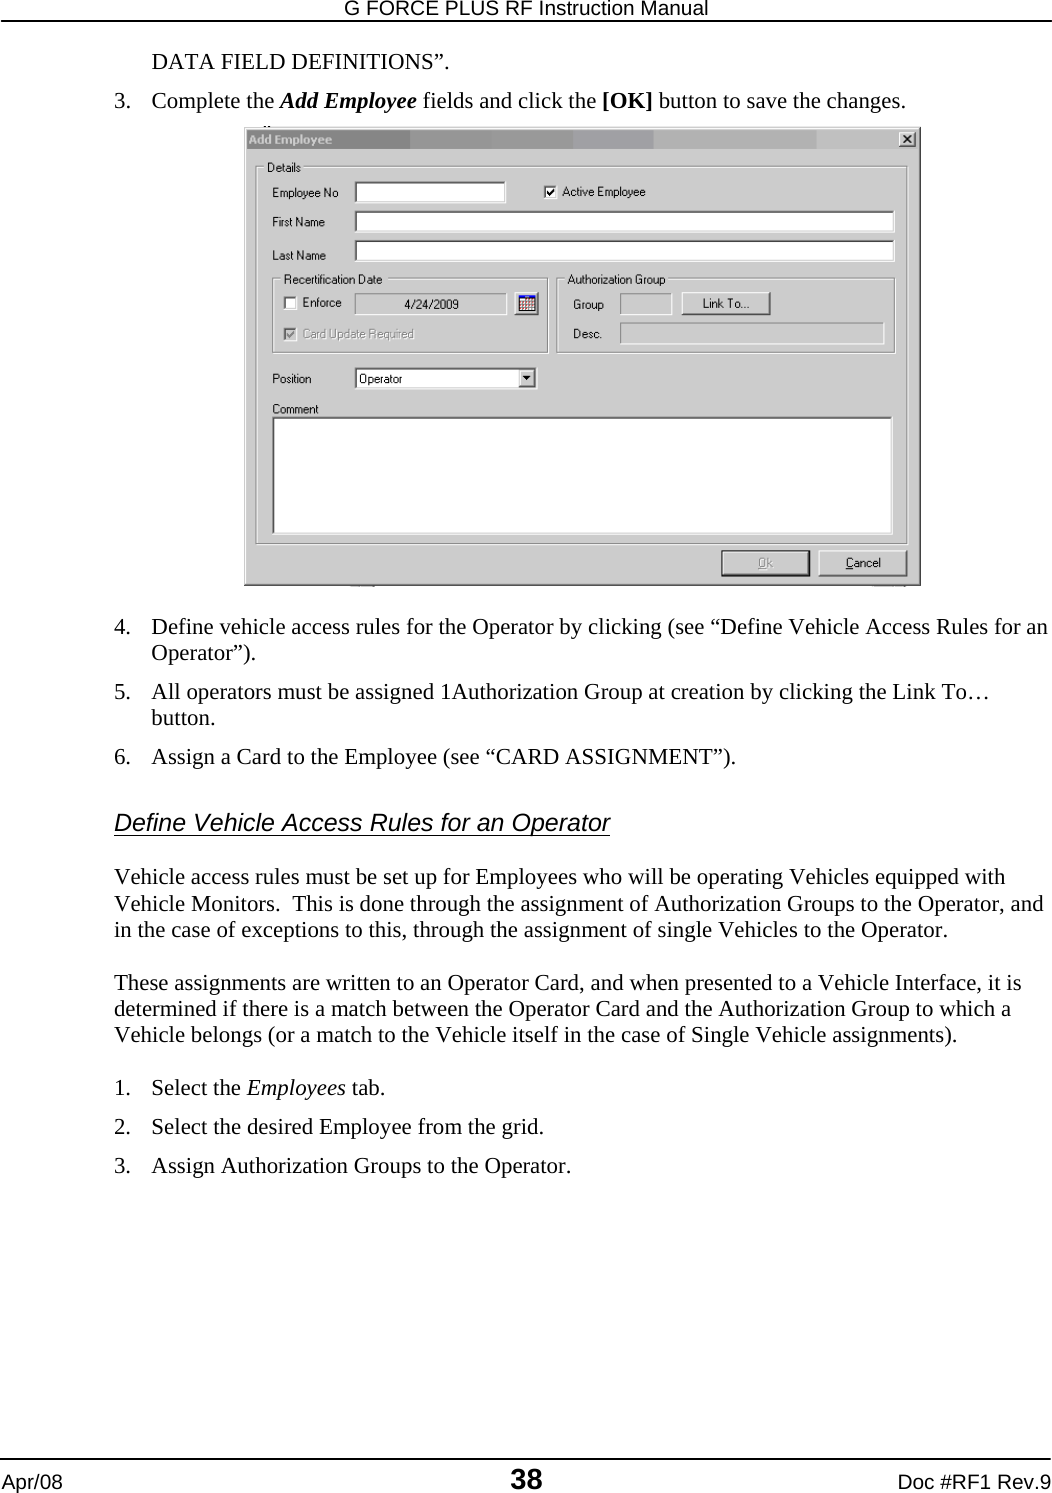 G FORCE PLUS RF Instruction Manual   Apr/08 38 Doc #RF1 Rev.9 DATA FIELD DEFINITIONS”. 3. Complete the Add Employee fields and click the [OK] button to save the changes.   4. Define vehicle access rules for the Operator by clicking (see “Define Vehicle Access Rules for an Operator”). 5. All operators must be assigned 1Authorization Group at creation by clicking the Link To… button. 6. Assign a Card to the Employee (see “CARD ASSIGNMENT”).  Define Vehicle Access Rules for an Operator  Vehicle access rules must be set up for Employees who will be operating Vehicles equipped with Vehicle Monitors.  This is done through the assignment of Authorization Groups to the Operator, and in the case of exceptions to this, through the assignment of single Vehicles to the Operator.  These assignments are written to an Operator Card, and when presented to a Vehicle Interface, it is determined if there is a match between the Operator Card and the Authorization Group to which a Vehicle belongs (or a match to the Vehicle itself in the case of Single Vehicle assignments).  1. Select the Employees tab. 2. Select the desired Employee from the grid. 3. Assign Authorization Groups to the Operator. 